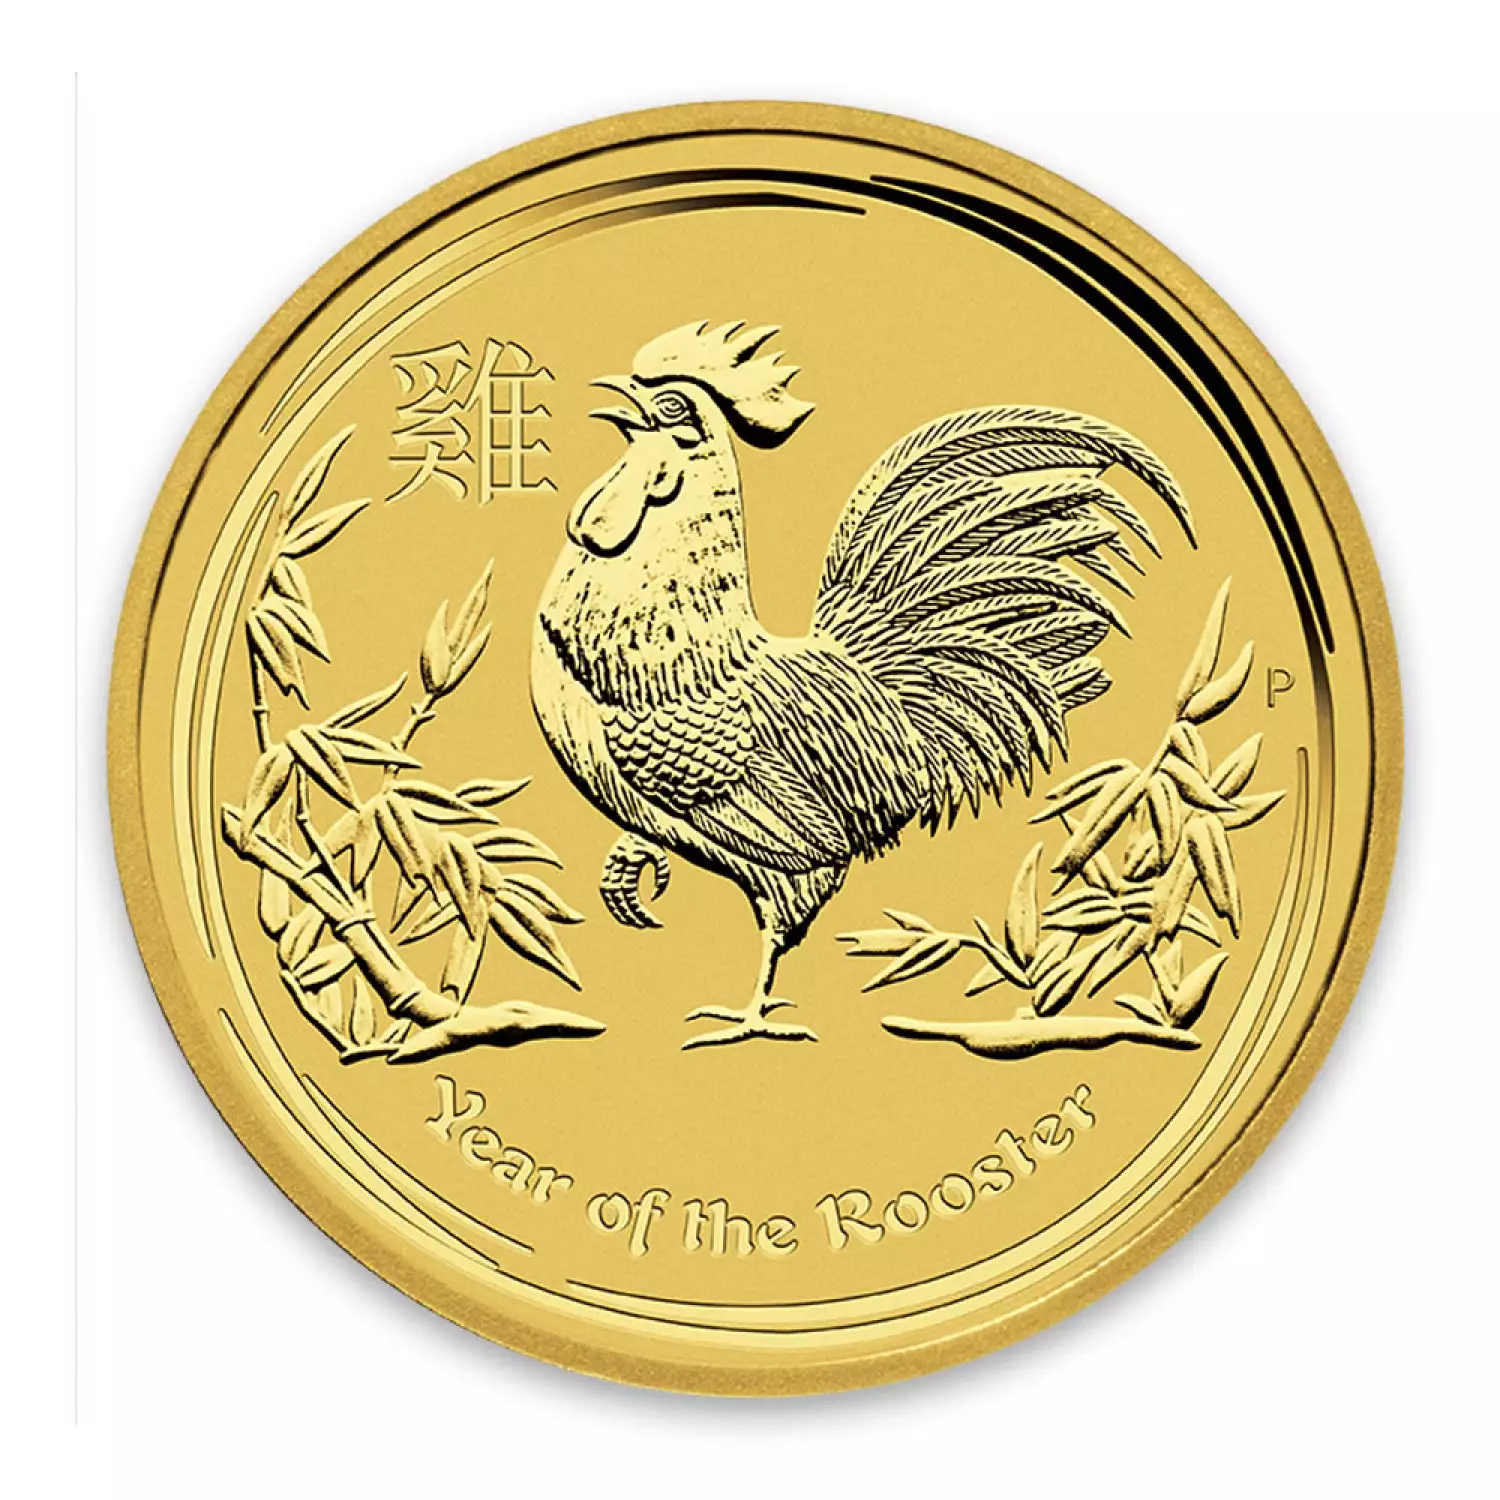 2017 1 oz Australian Perth Mint Gold Lunar II: Year of the Rooster (3)